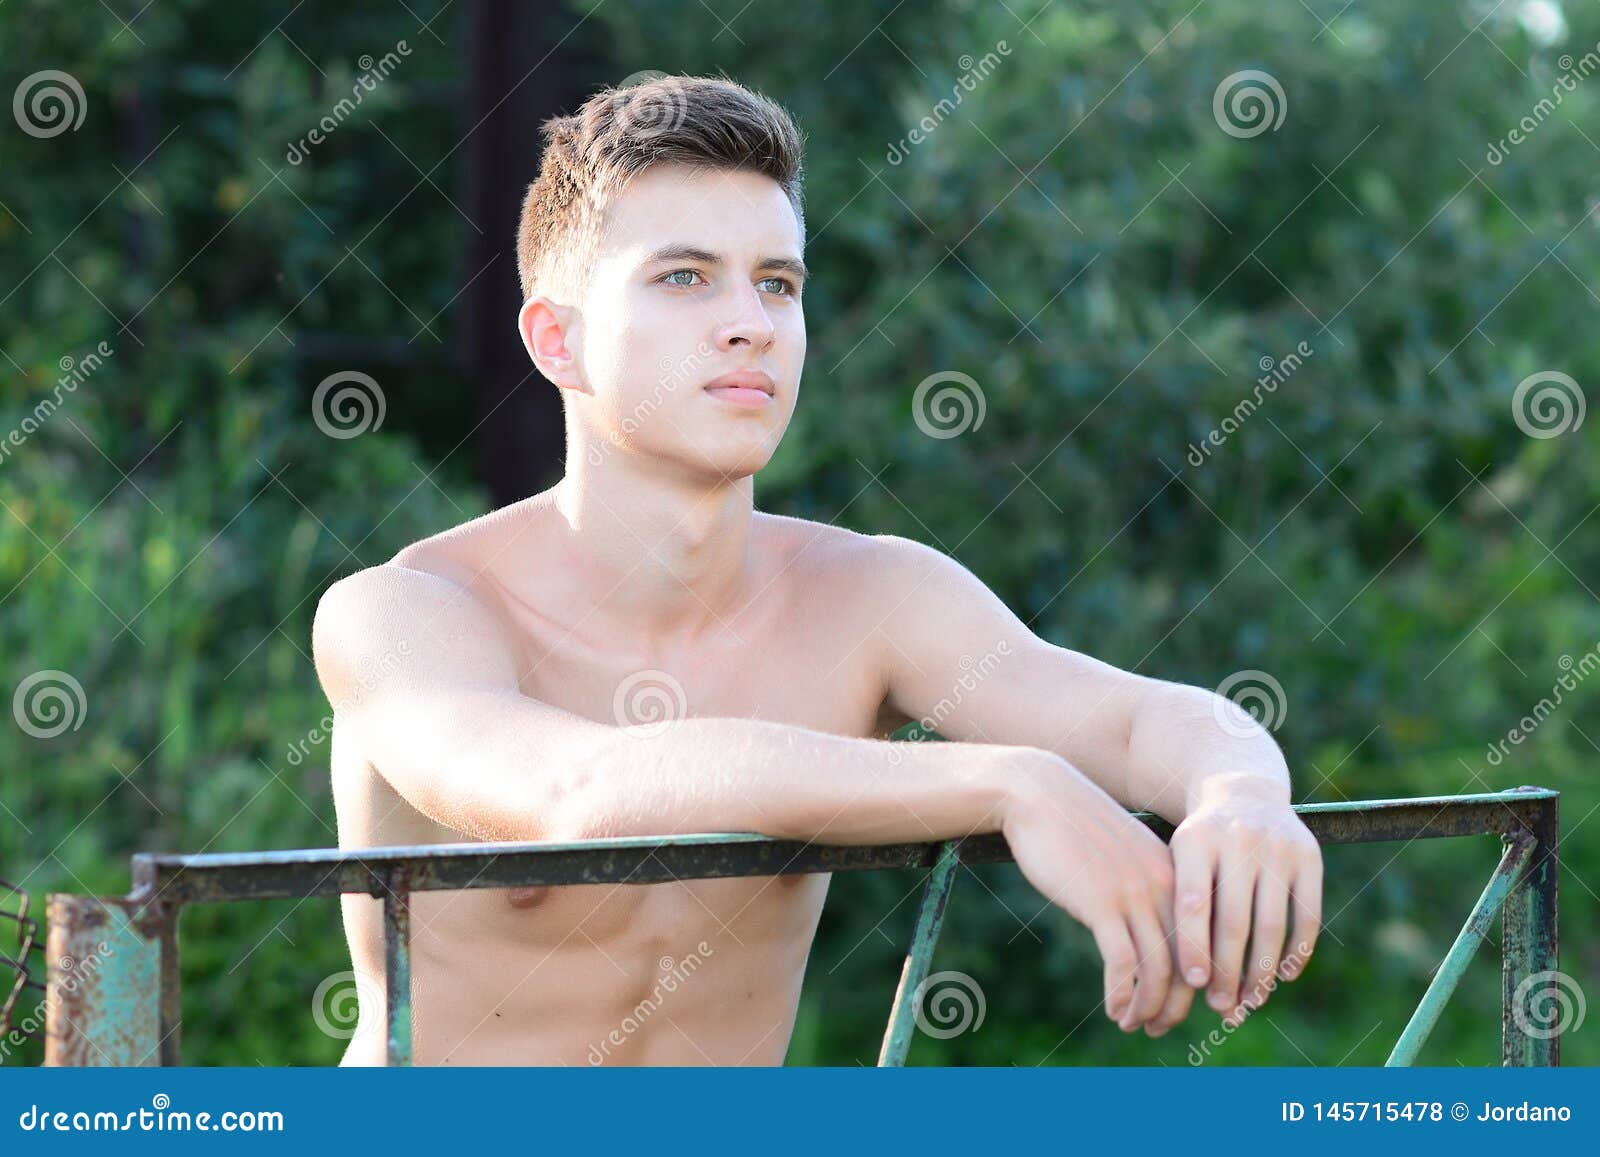 Good Looking Shirtless Fitnes Male Model Relaxing Stock Photo - Image ...